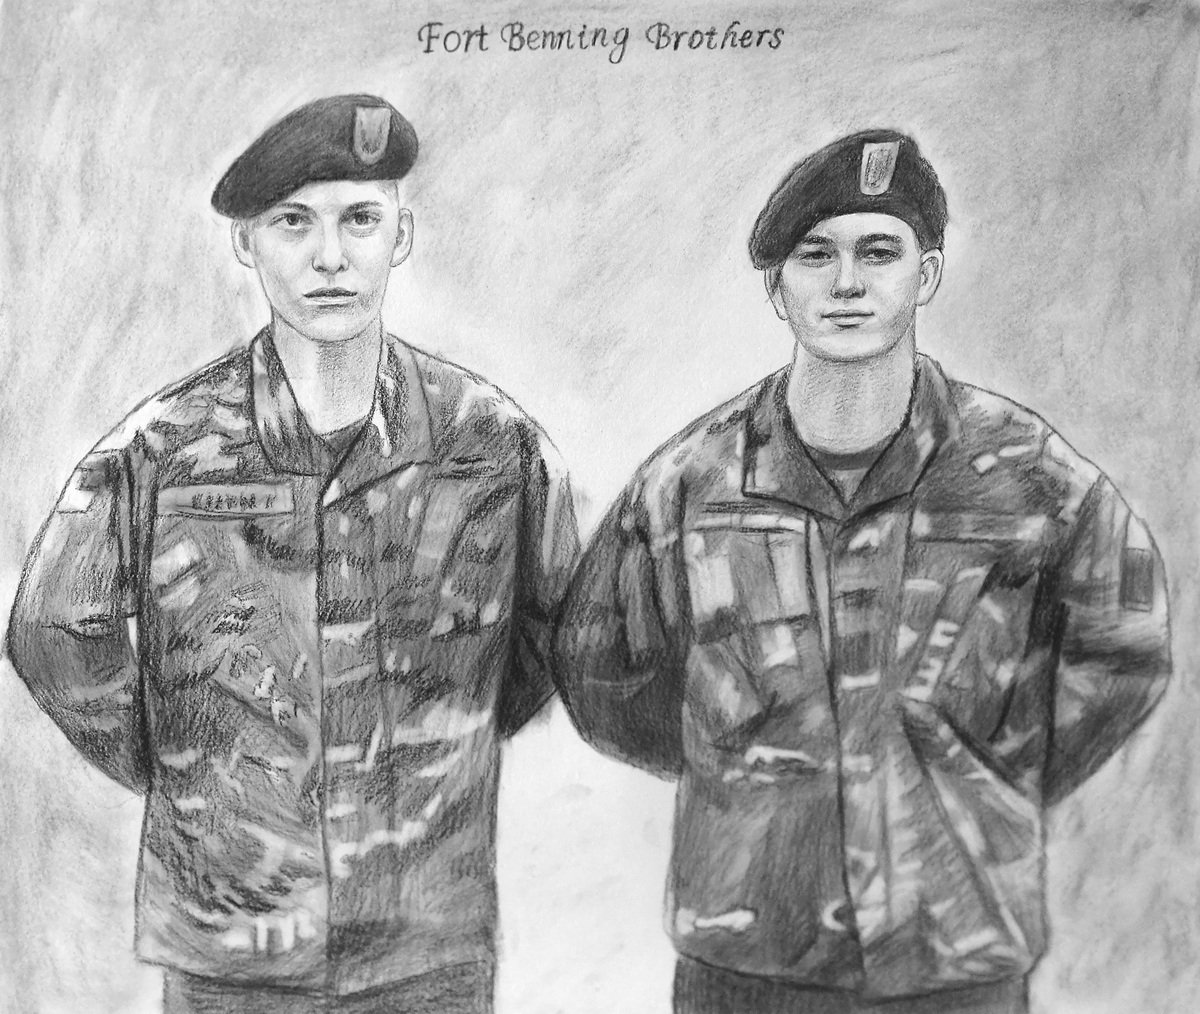 A pencil sketch of two American soldiers in uniform.